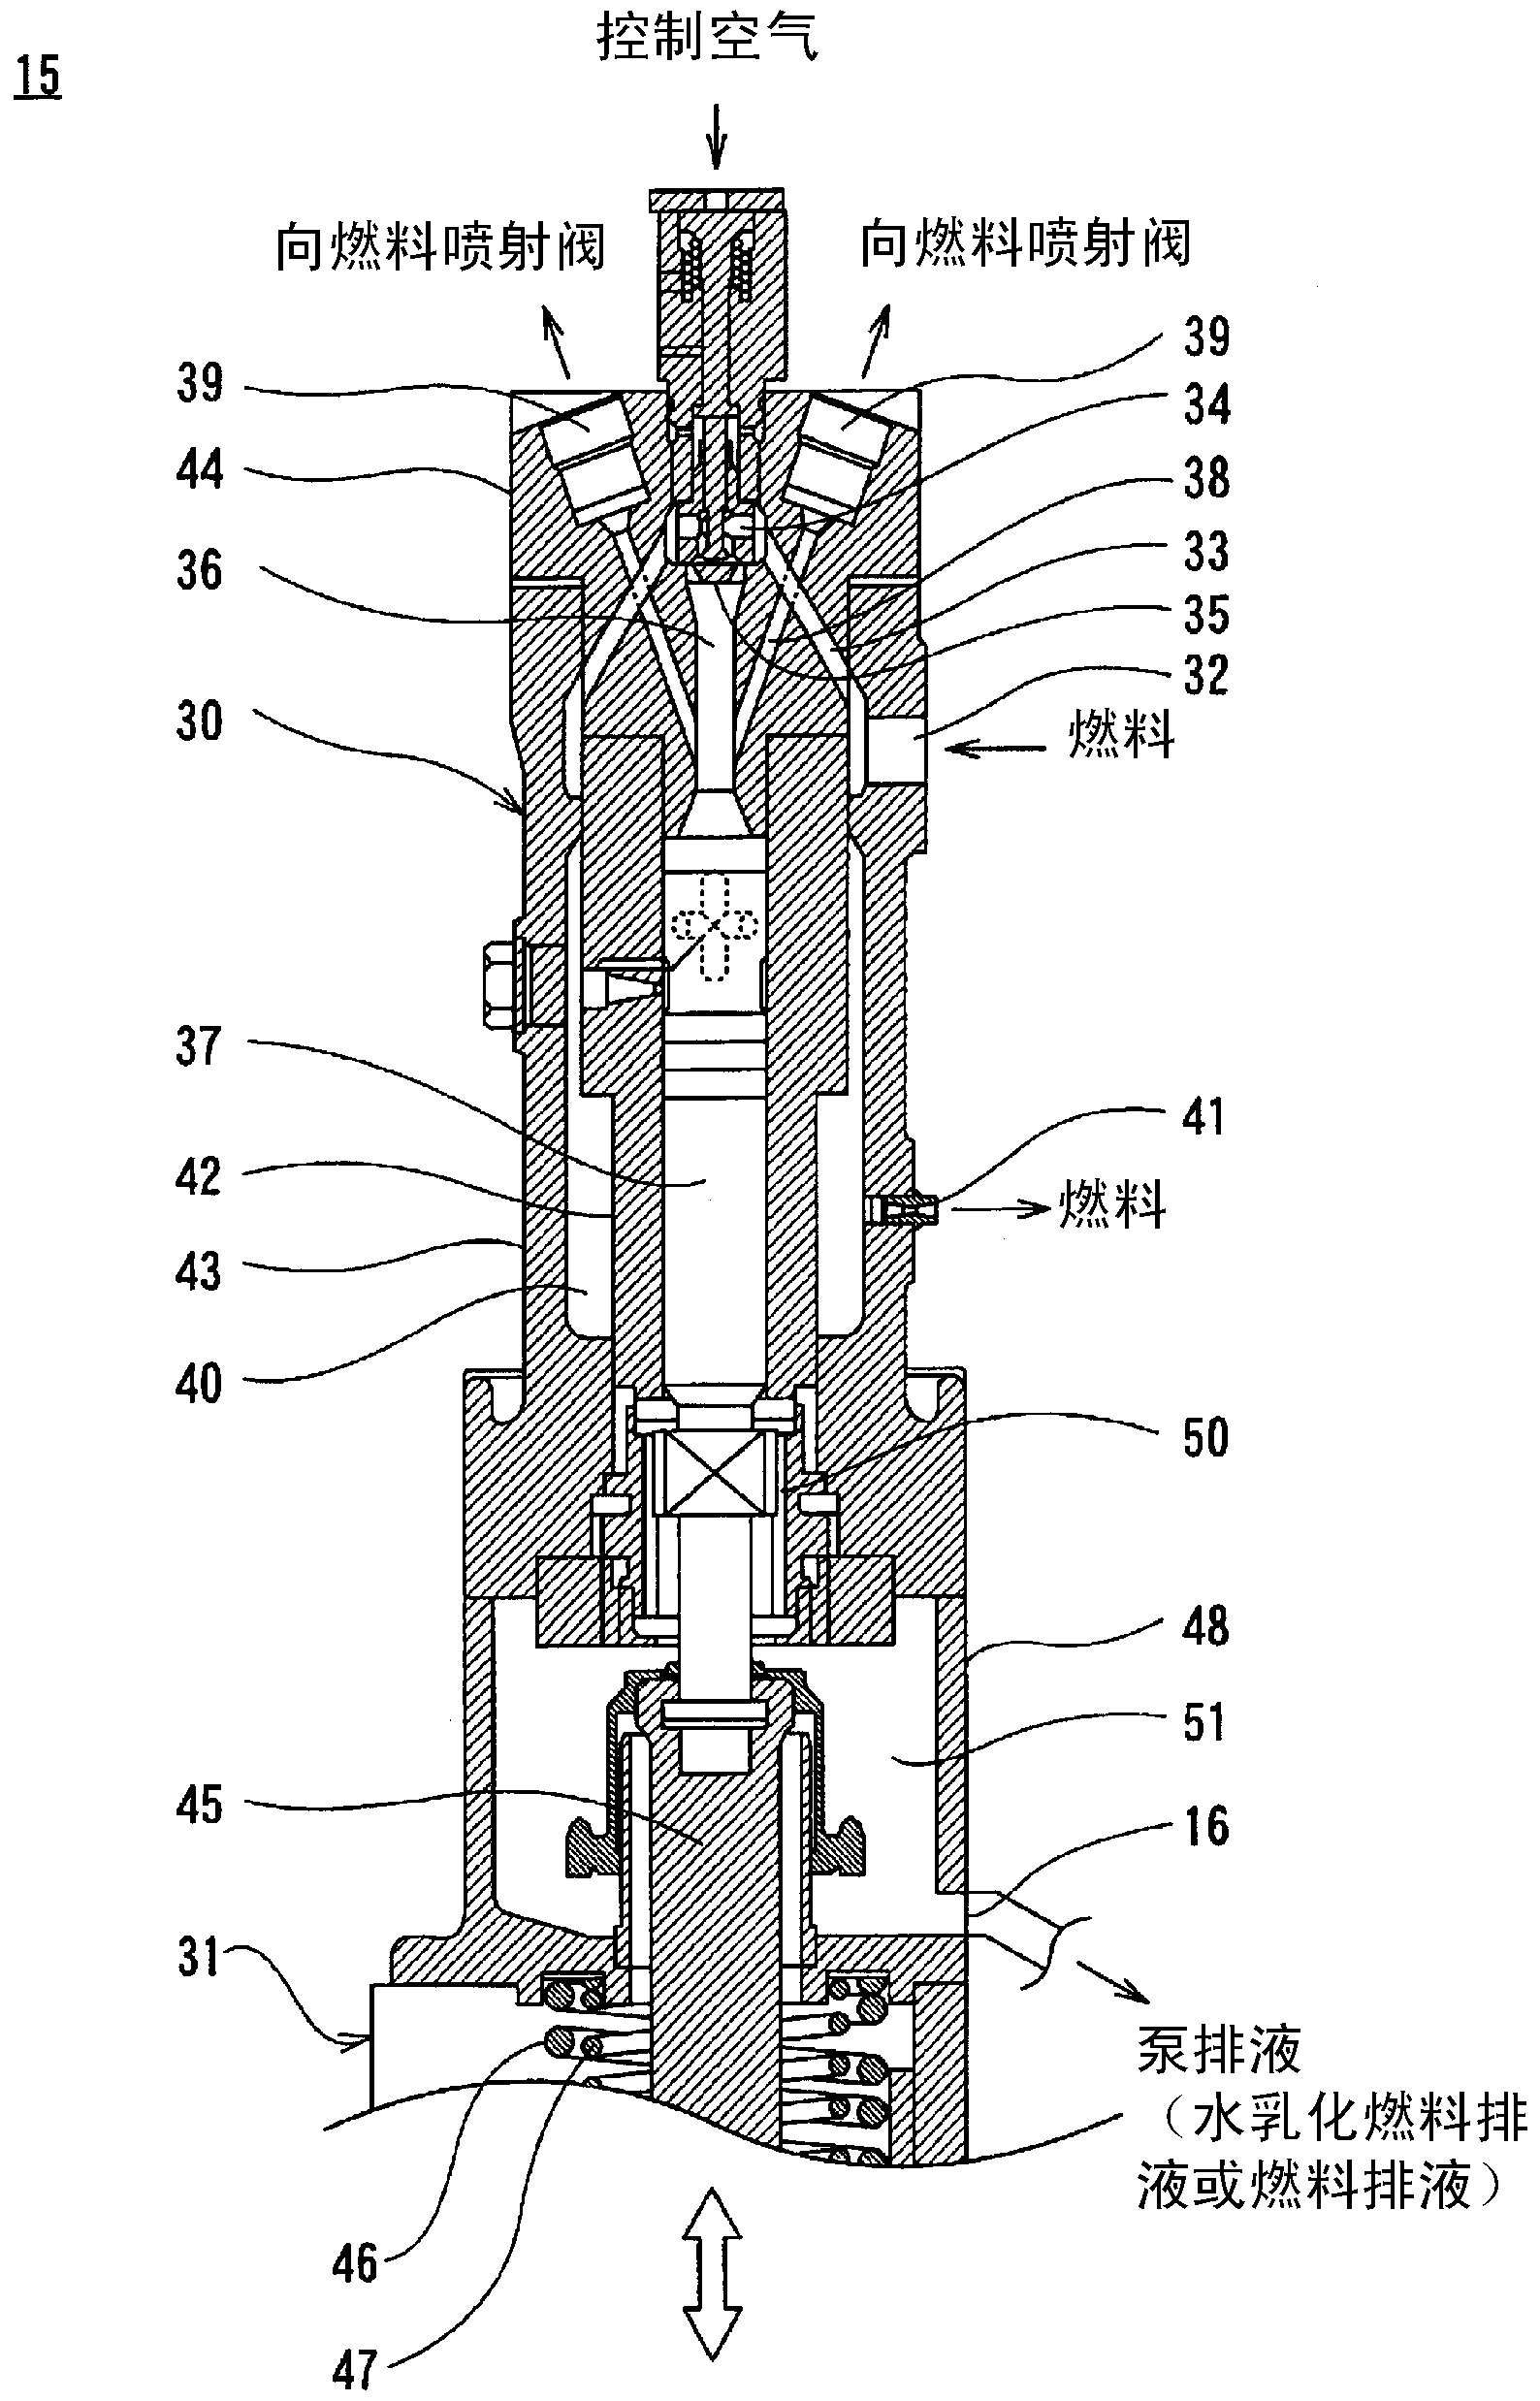 Engine system with reuse device for water emulsion fuel drain